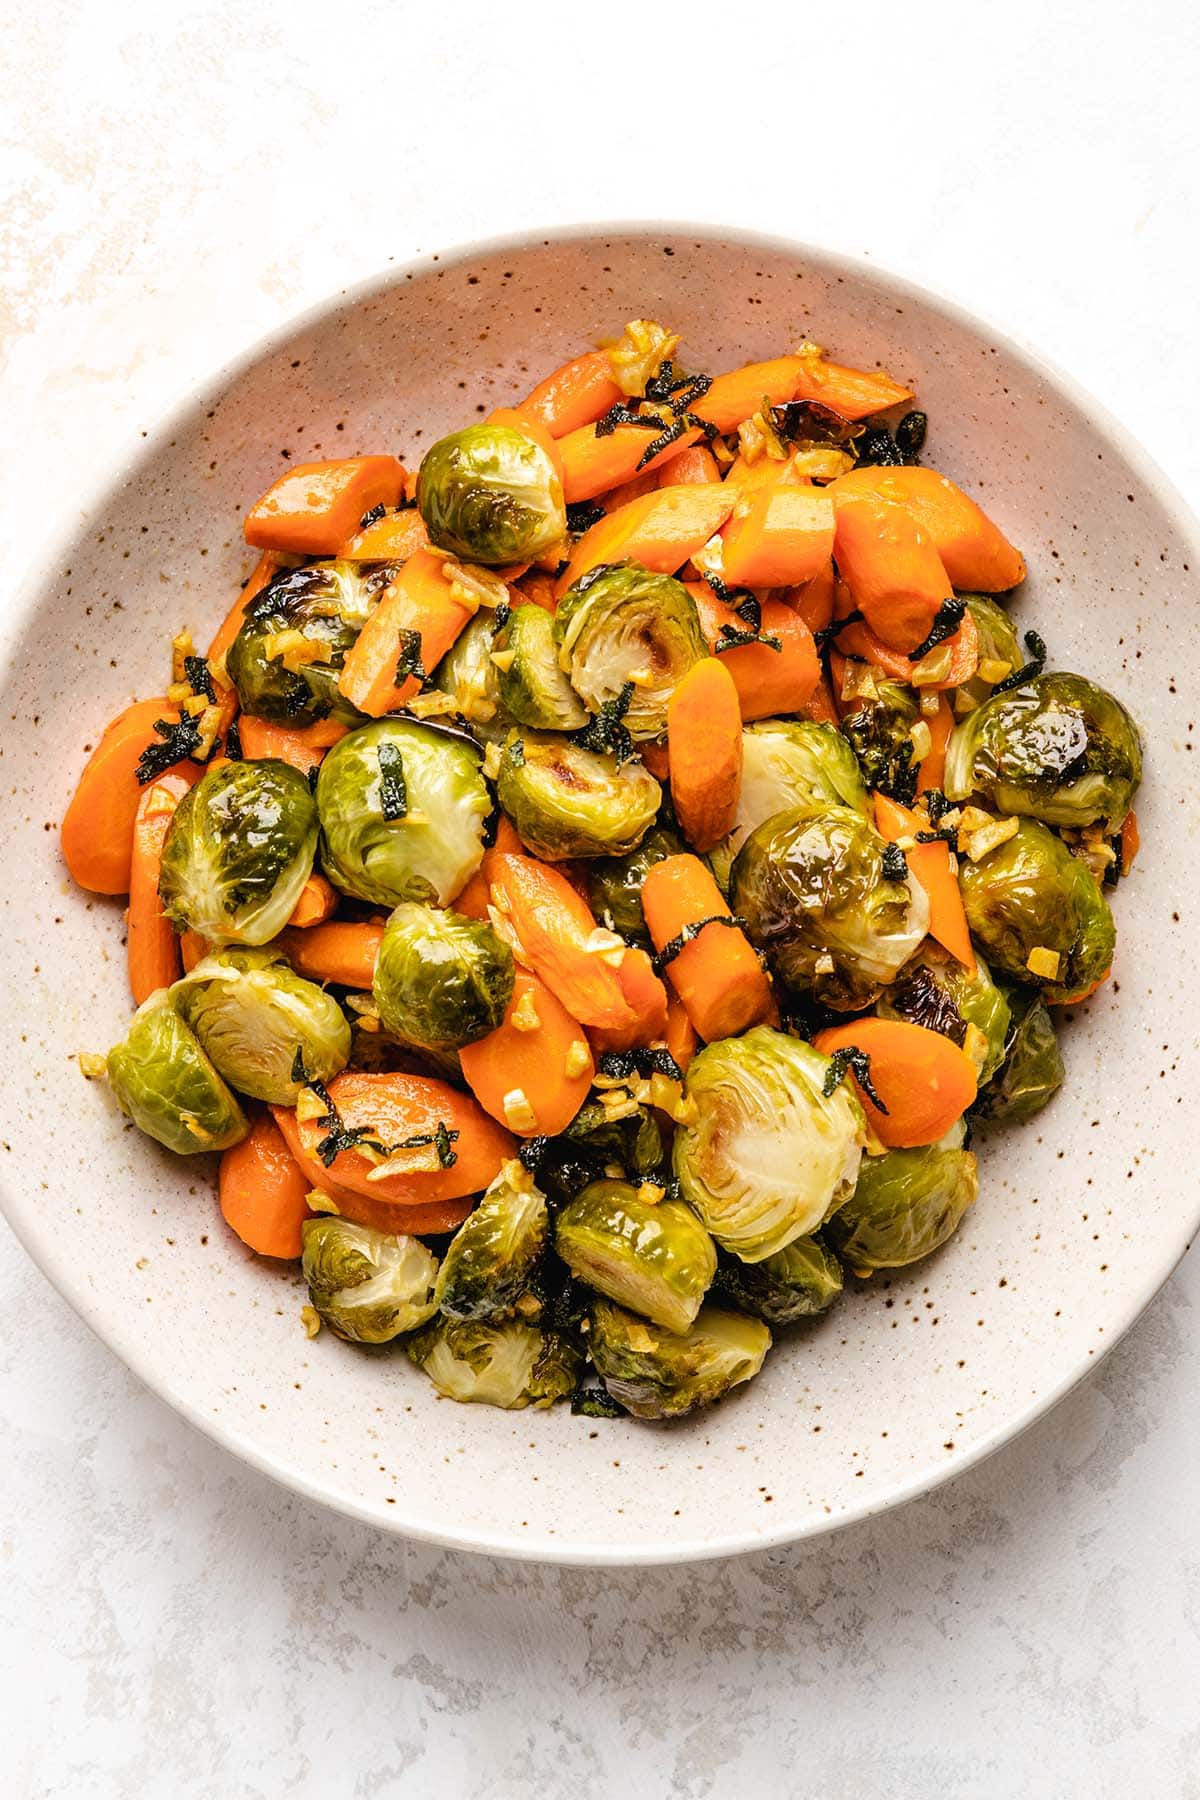 Roasted Brussels sprouts and carrots tossed with brown butter sage in a beige speckled bowl.